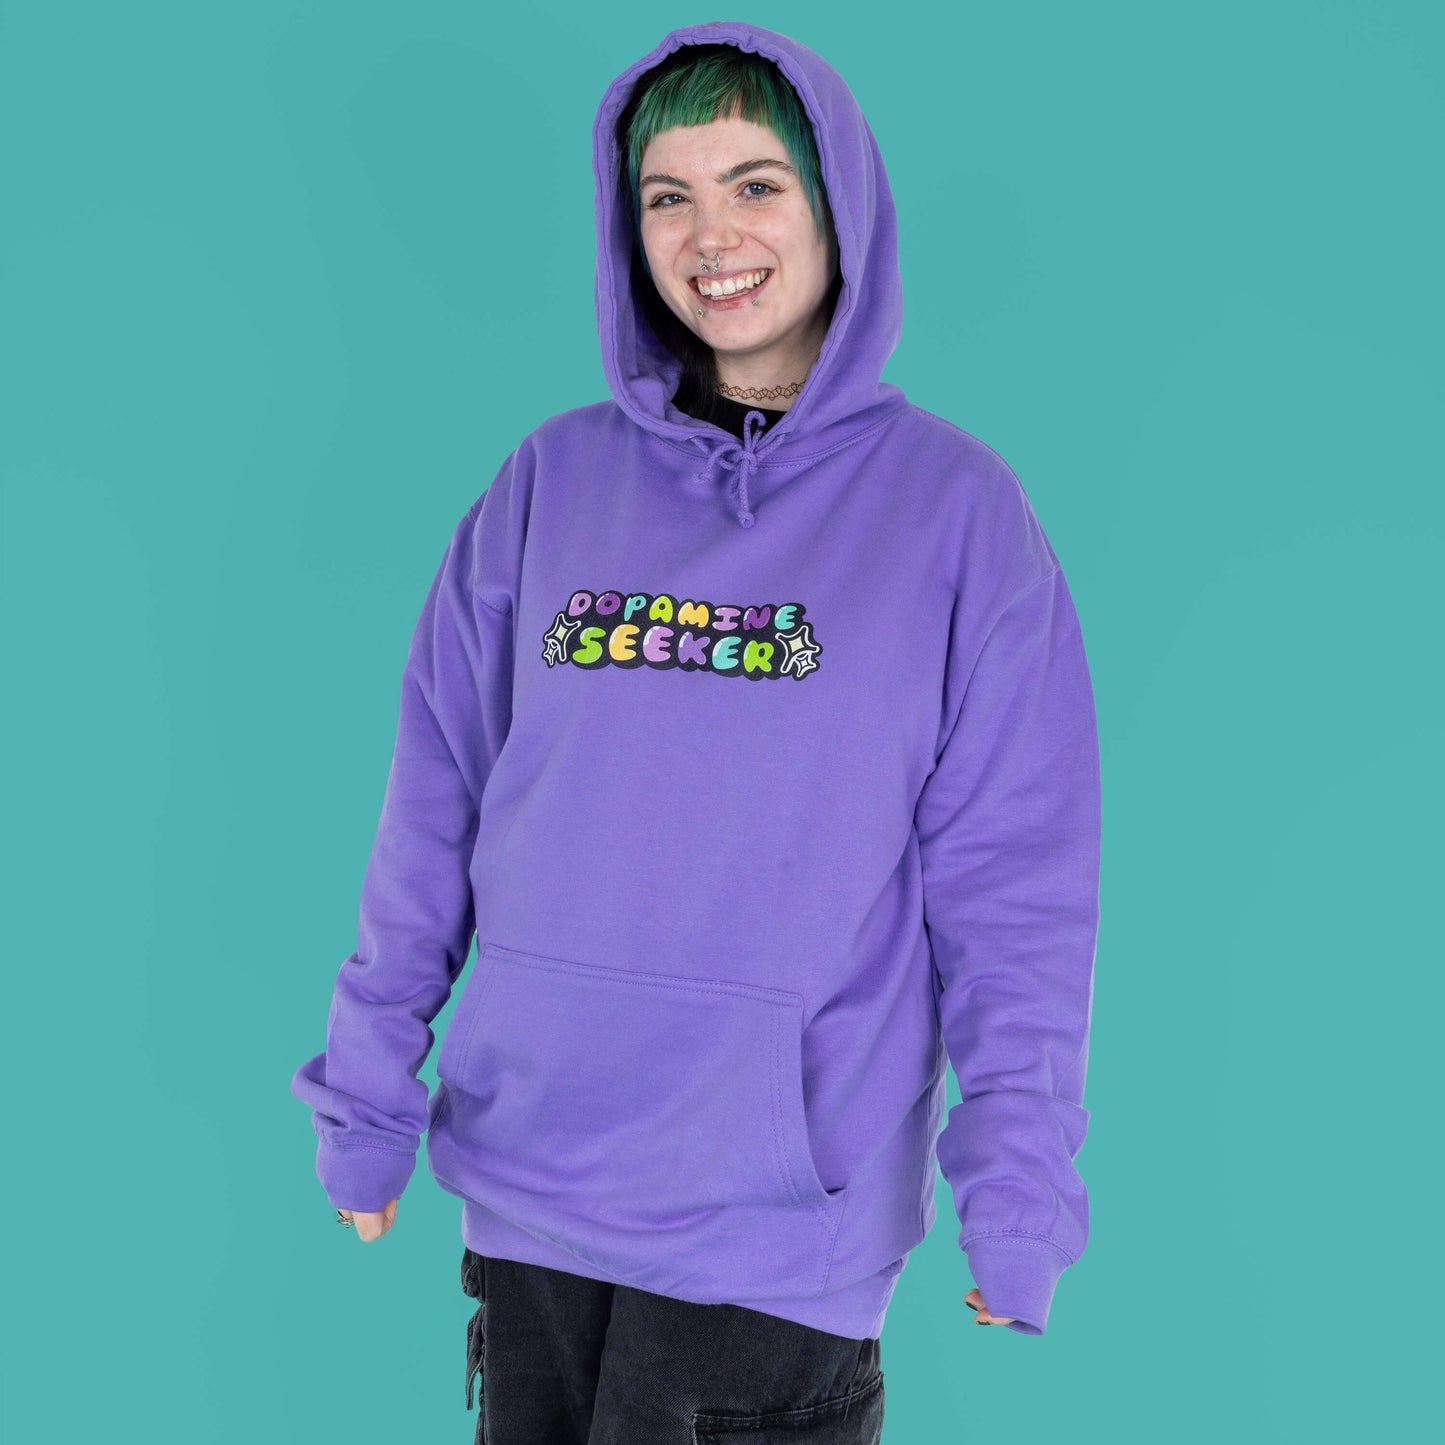 The Dopamine Seeker Hoodie in digital lavender being modelled by Faeryn who has a green and black mullet, they have styled the cosy hoodie with wide leg charcoal jeans. They are facing forward smiling with the hood up and their hands by their side. The hoodie design has 'dopamine seeker' written in the middle in rainbow bubble font and black sparkle outlines. The hoodie has purple drawstrings and a large centre pocket. Design is raising awareness for ADHD and neurodivergence.